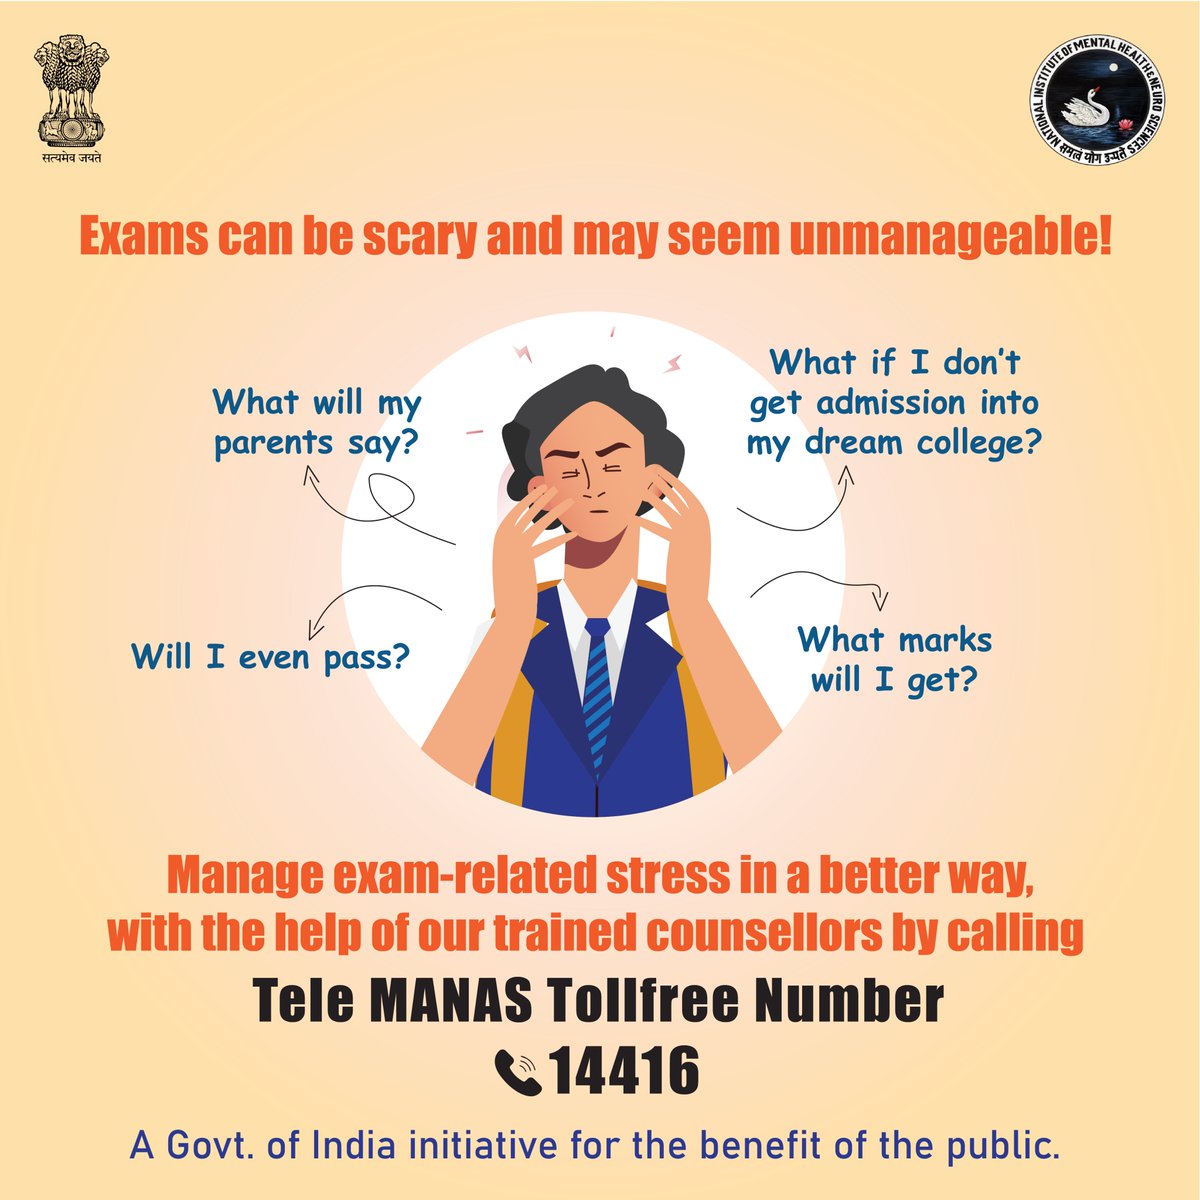 When the pressure of exams feels unbearable, remember, Tele Manas is here to share the load. Dial 14416 and our mental health representative will help you to deal exam related stress with ease.
#ExamStress #ExamSeason #StayCalm #StayFocused #StudyMotivation #PositiveMindset…